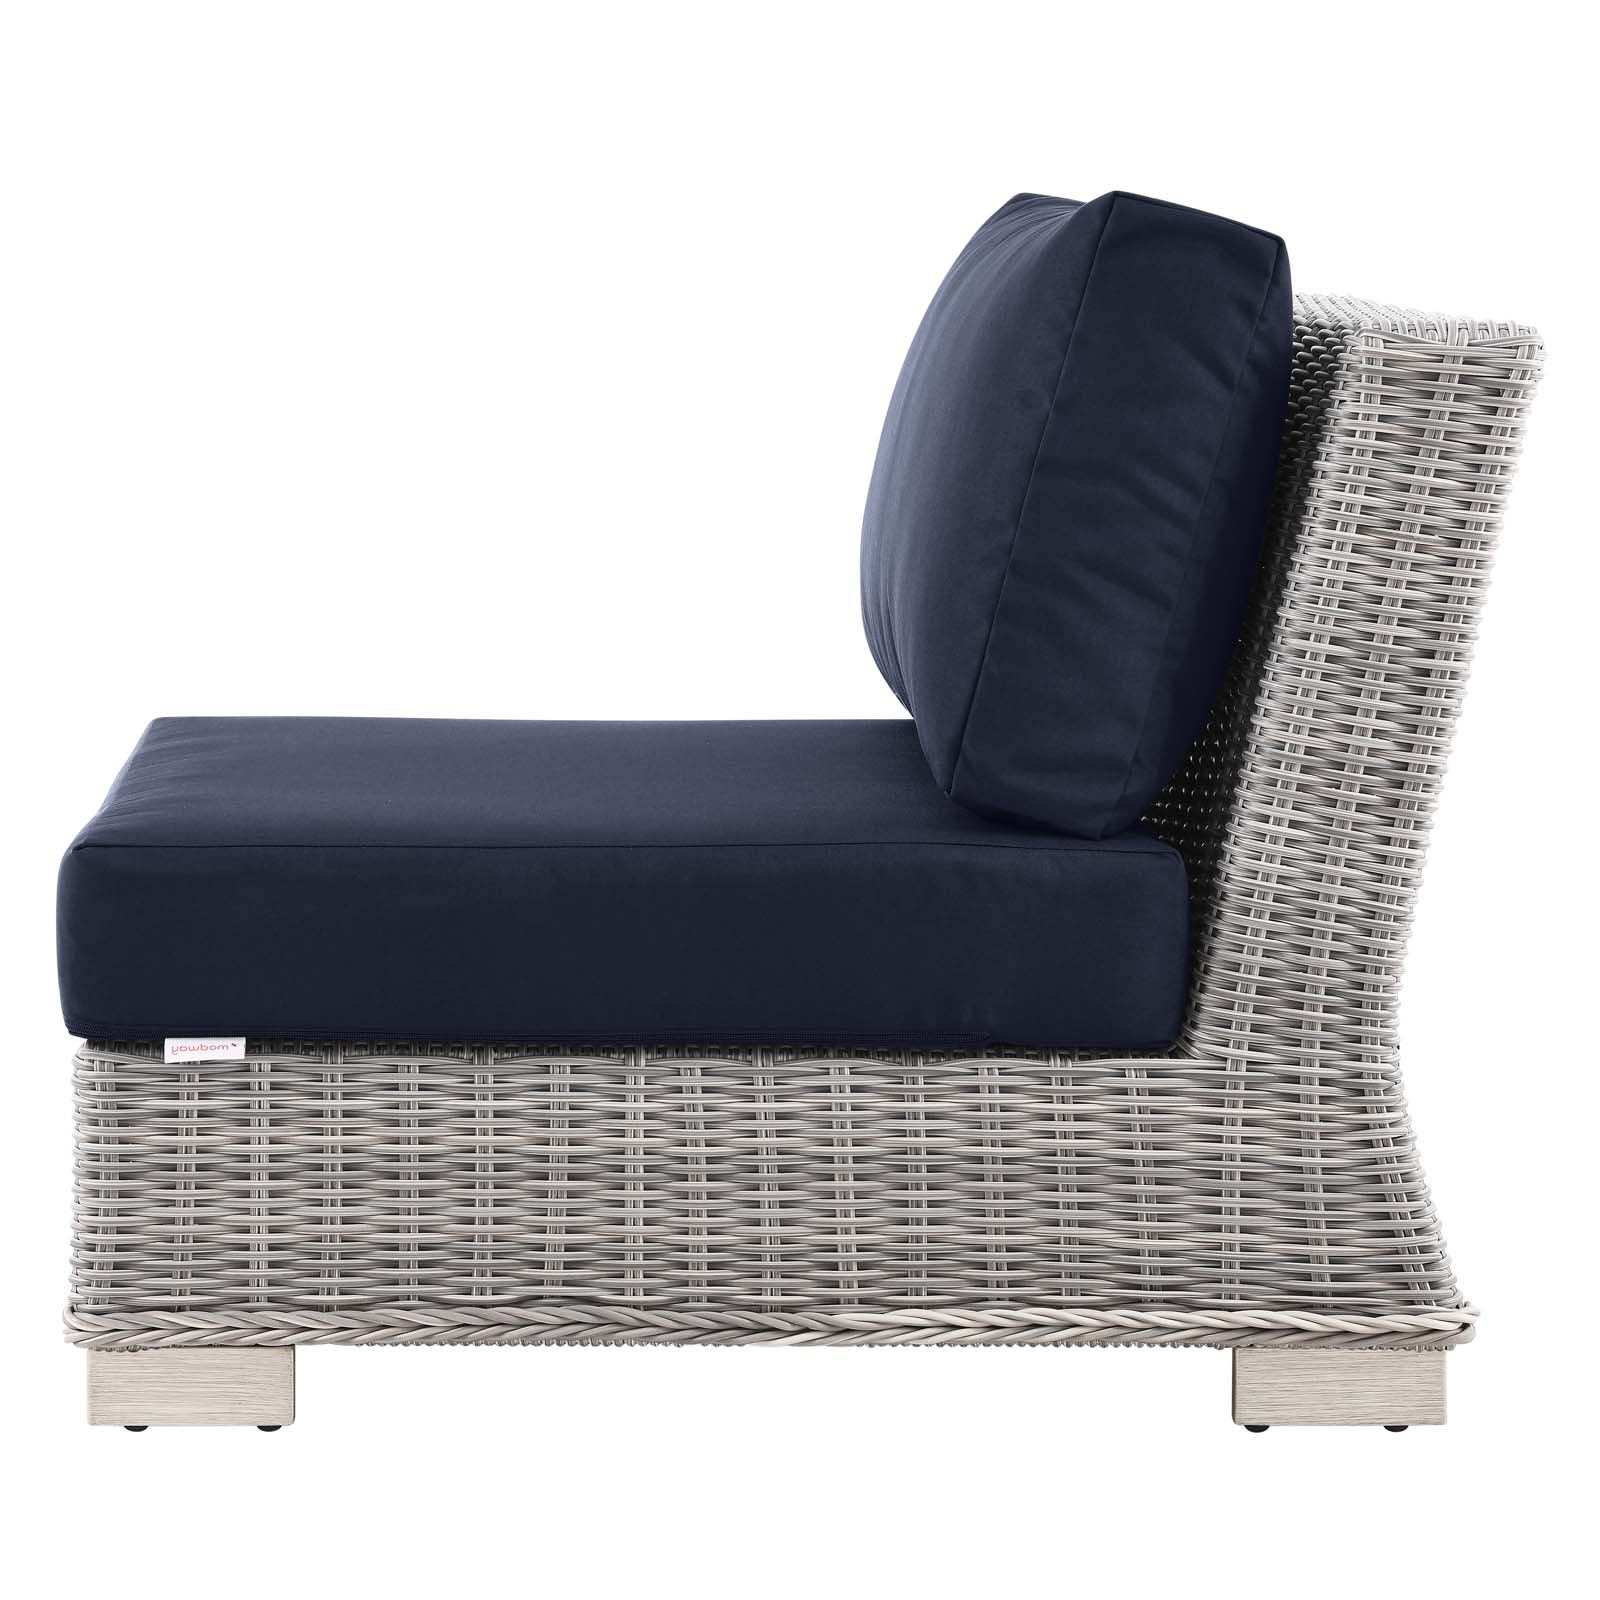 Lounge Sectional Sofa Chair Set, Rattan, Wicker, Light Grey Gray Blue Navy, Modern Contemporary Urban Design, Outdoor Patio Balcony Cafe Bistro Garden Furniture Hotel Hospitality - image 4 of 10